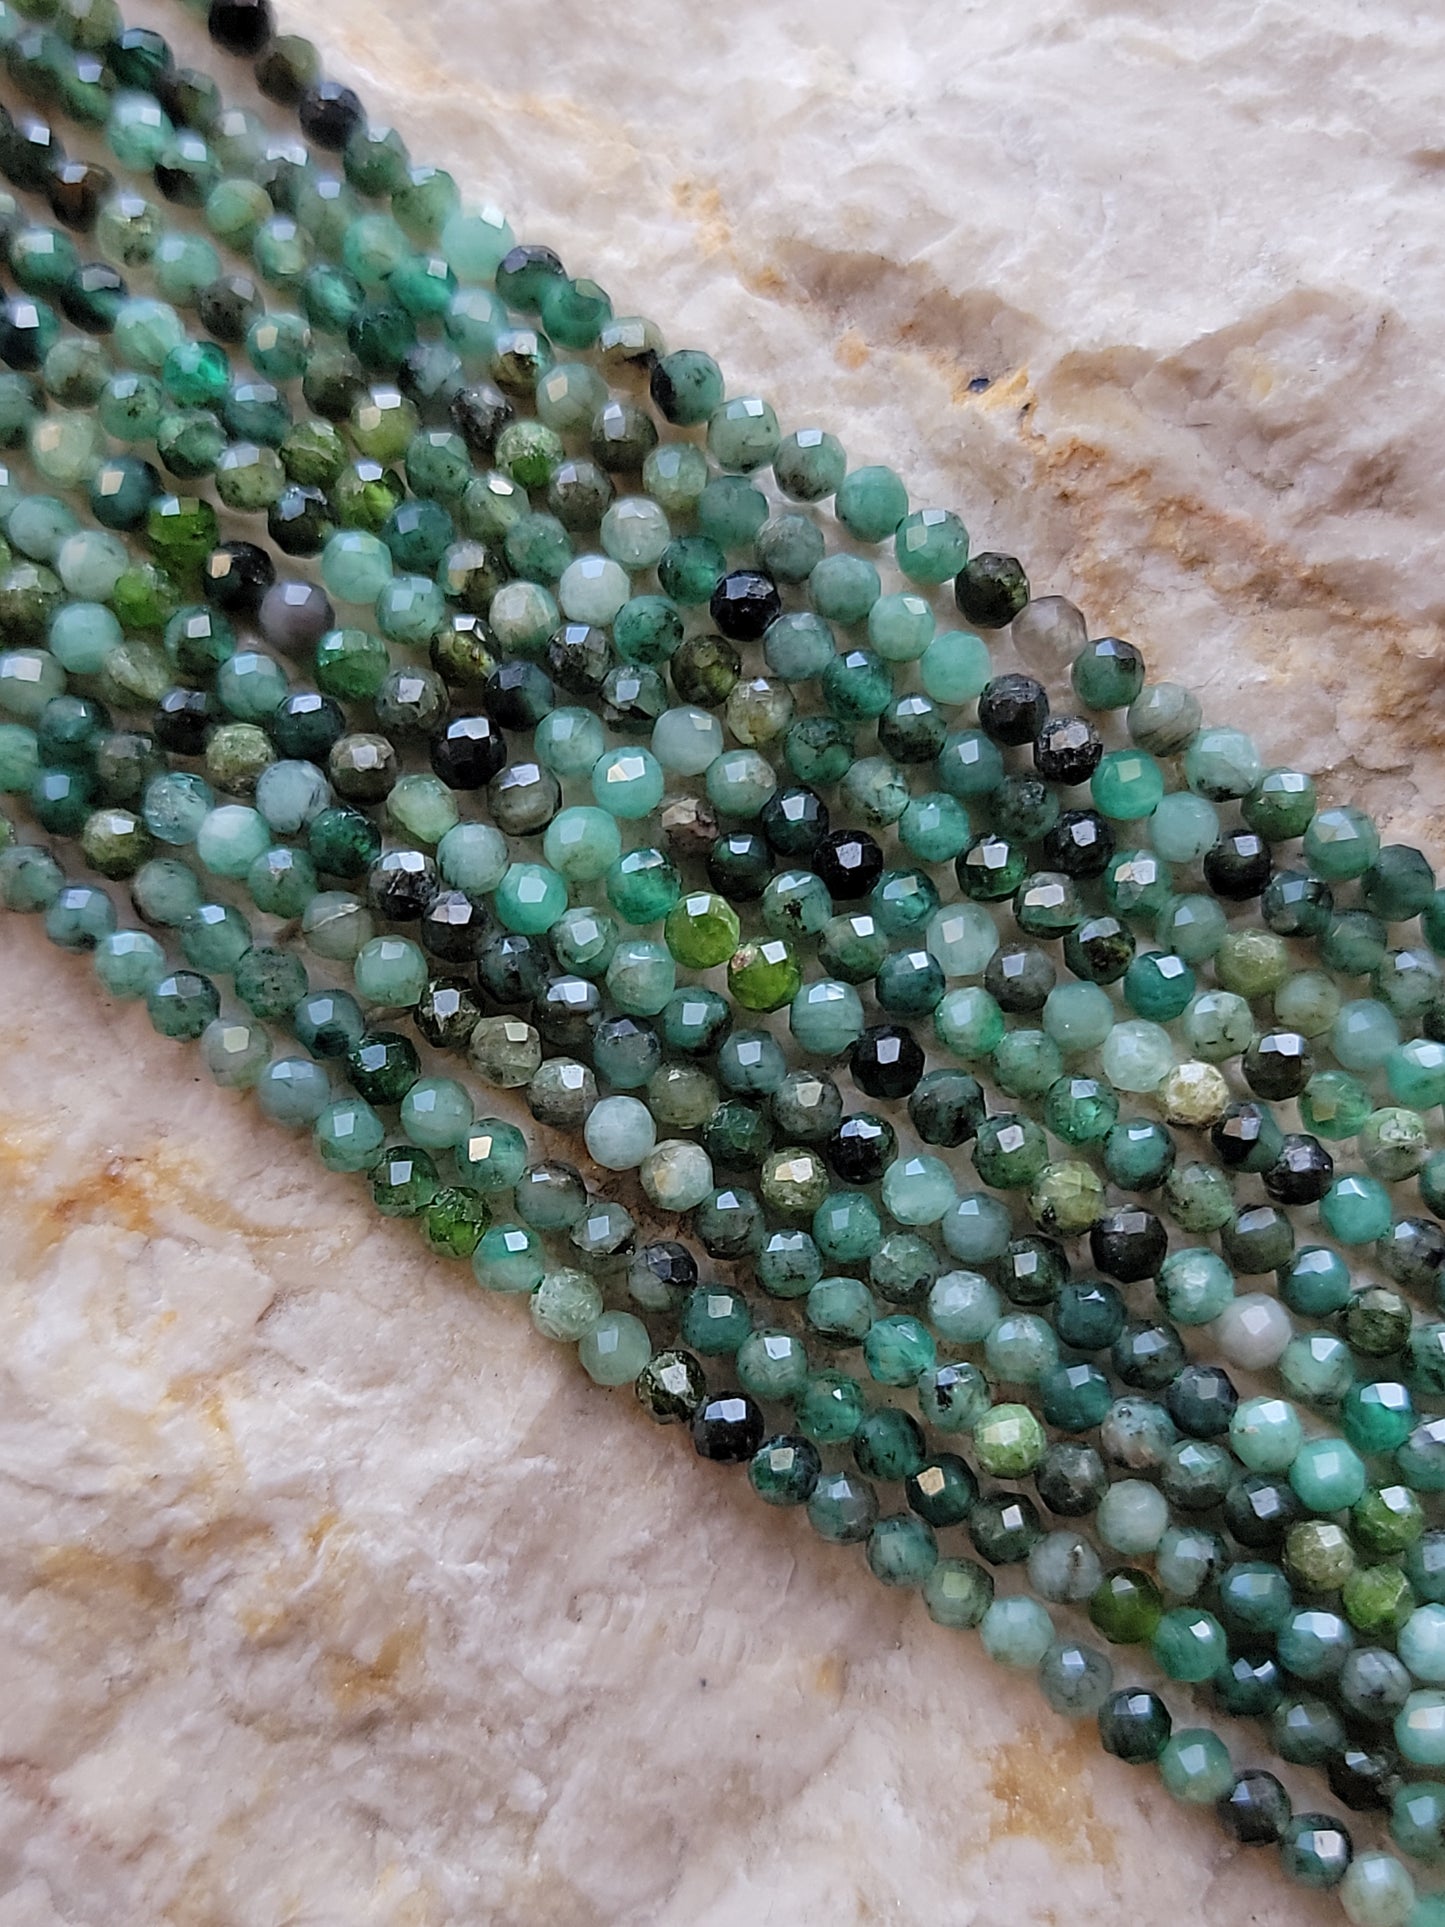 Crafting supplies such as emerald beads available at wholesale and retail prices, only at our crystal shop in San Diego!